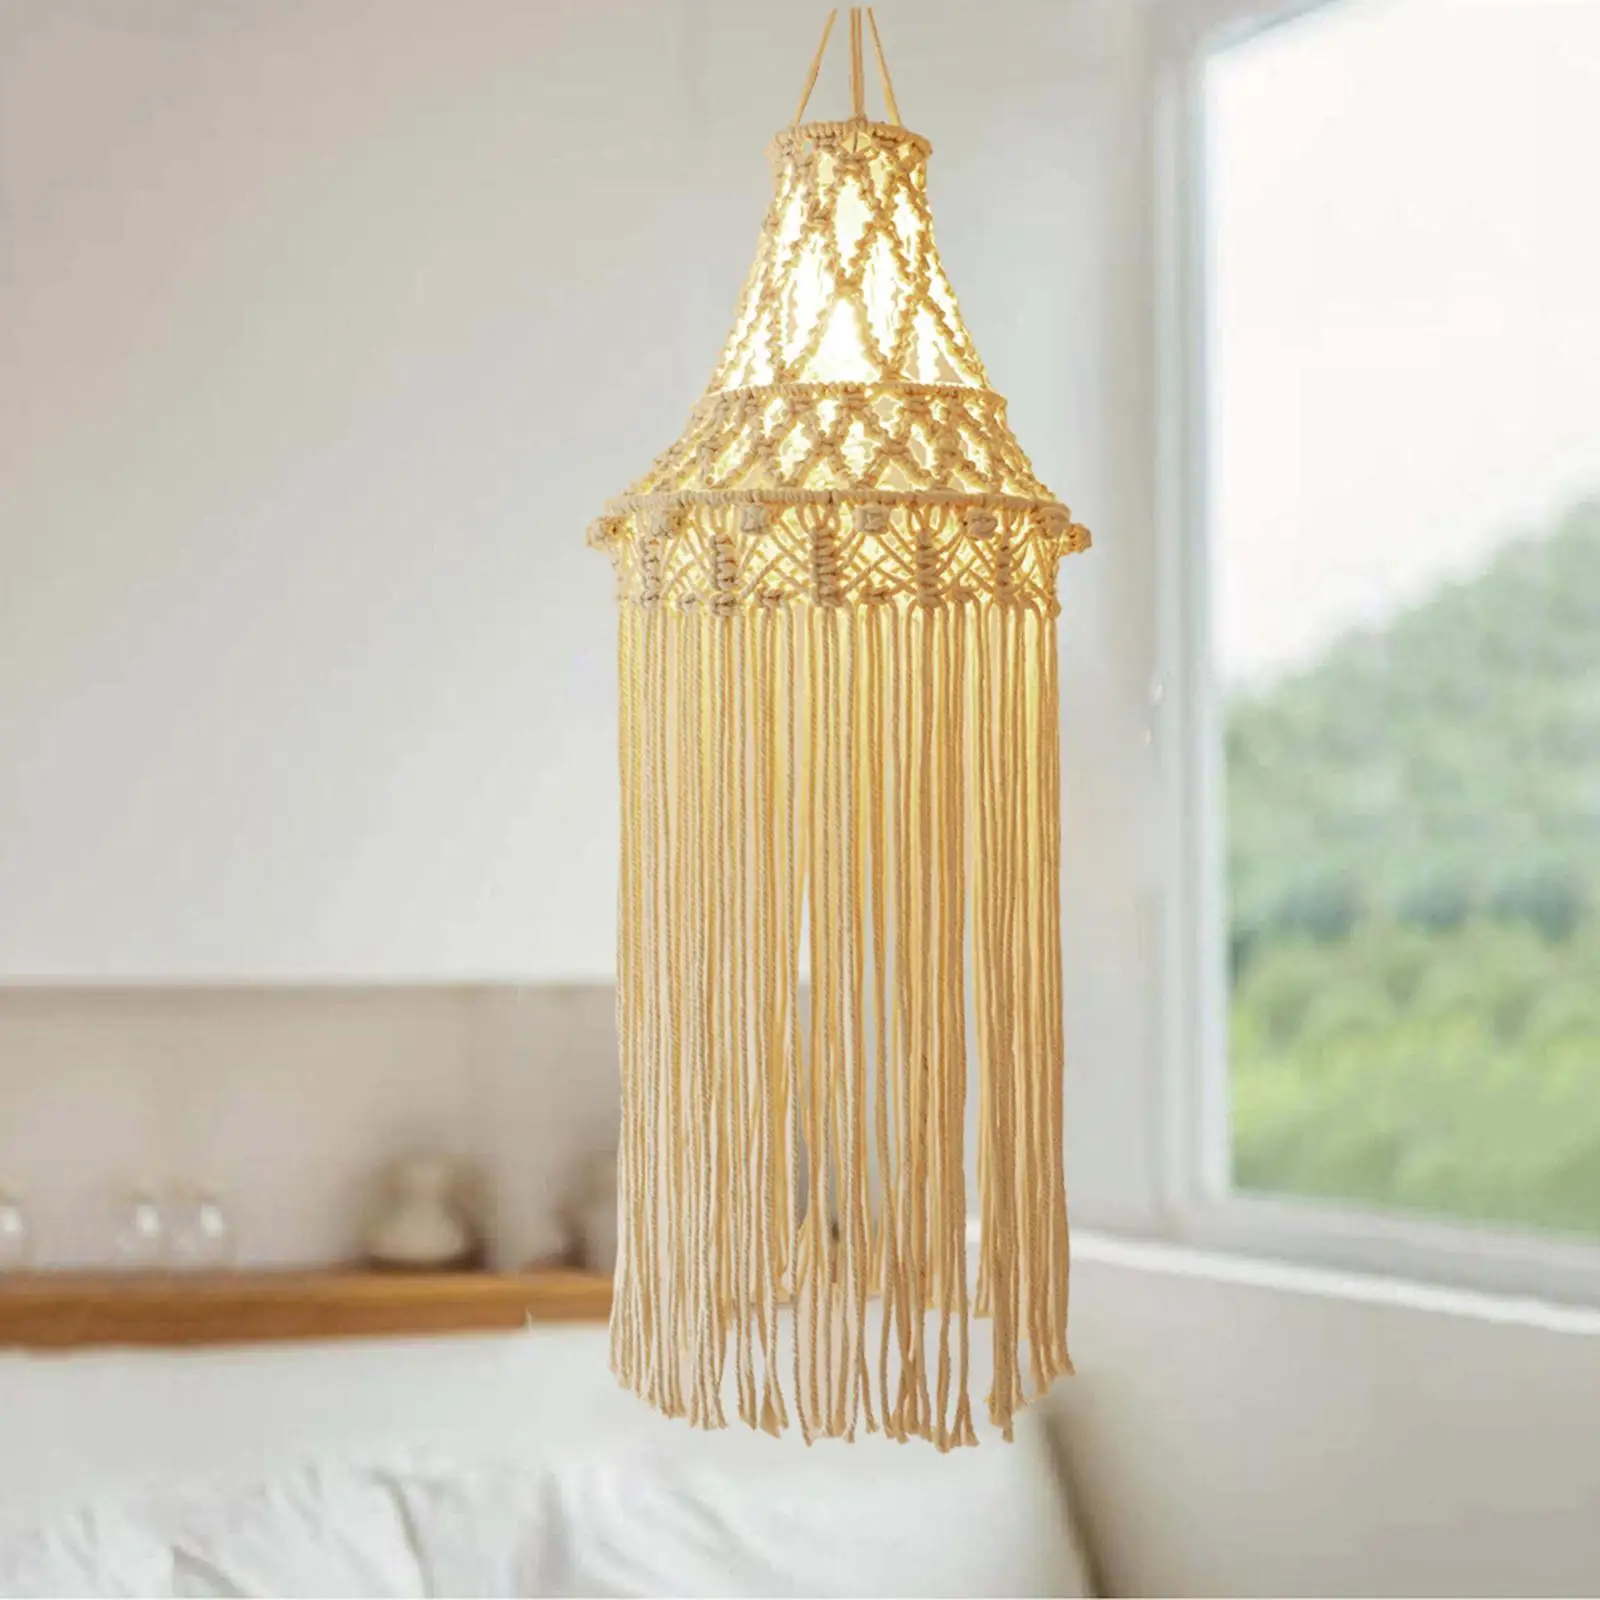 Vintage Style Lampshade Woven Boho Pendant Chandeliers Hanging Cotton Macrame Lamp Shade Decor for Office Hotel Bedroom